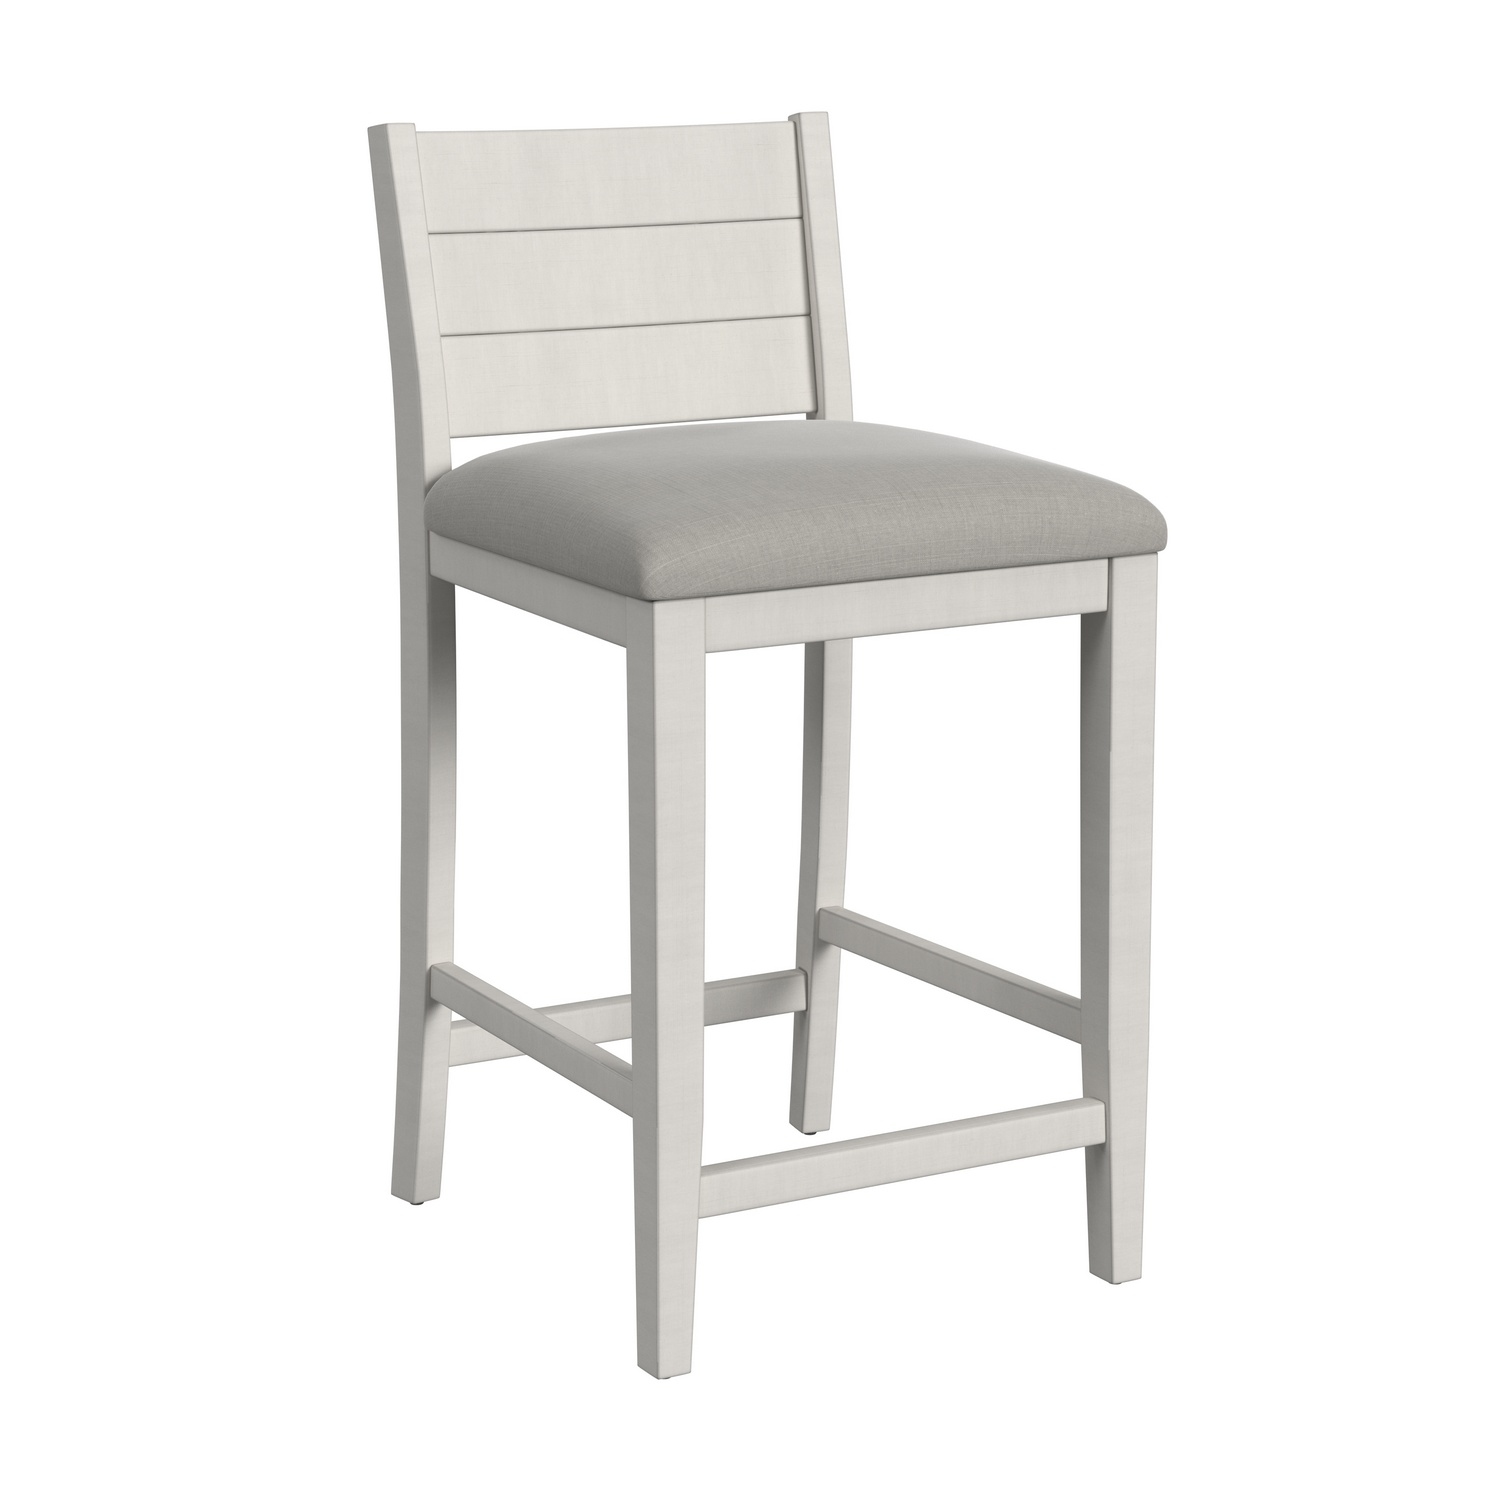 Hillsdale Fowler Wood Counter Height Stool - Sea White